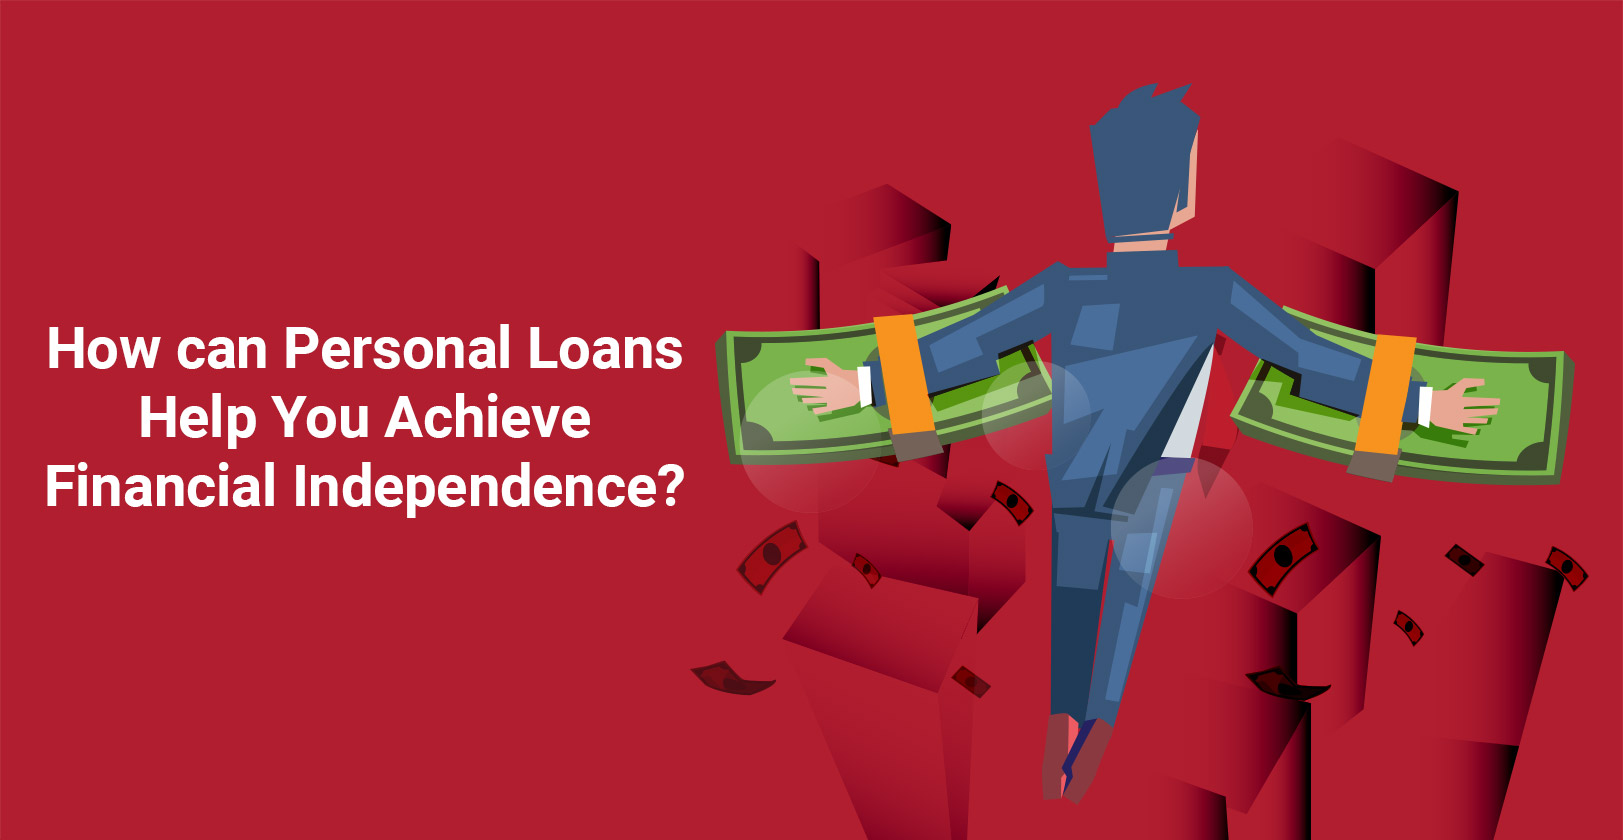 How Can Personal Loans Help You Achieve Financial Independence?